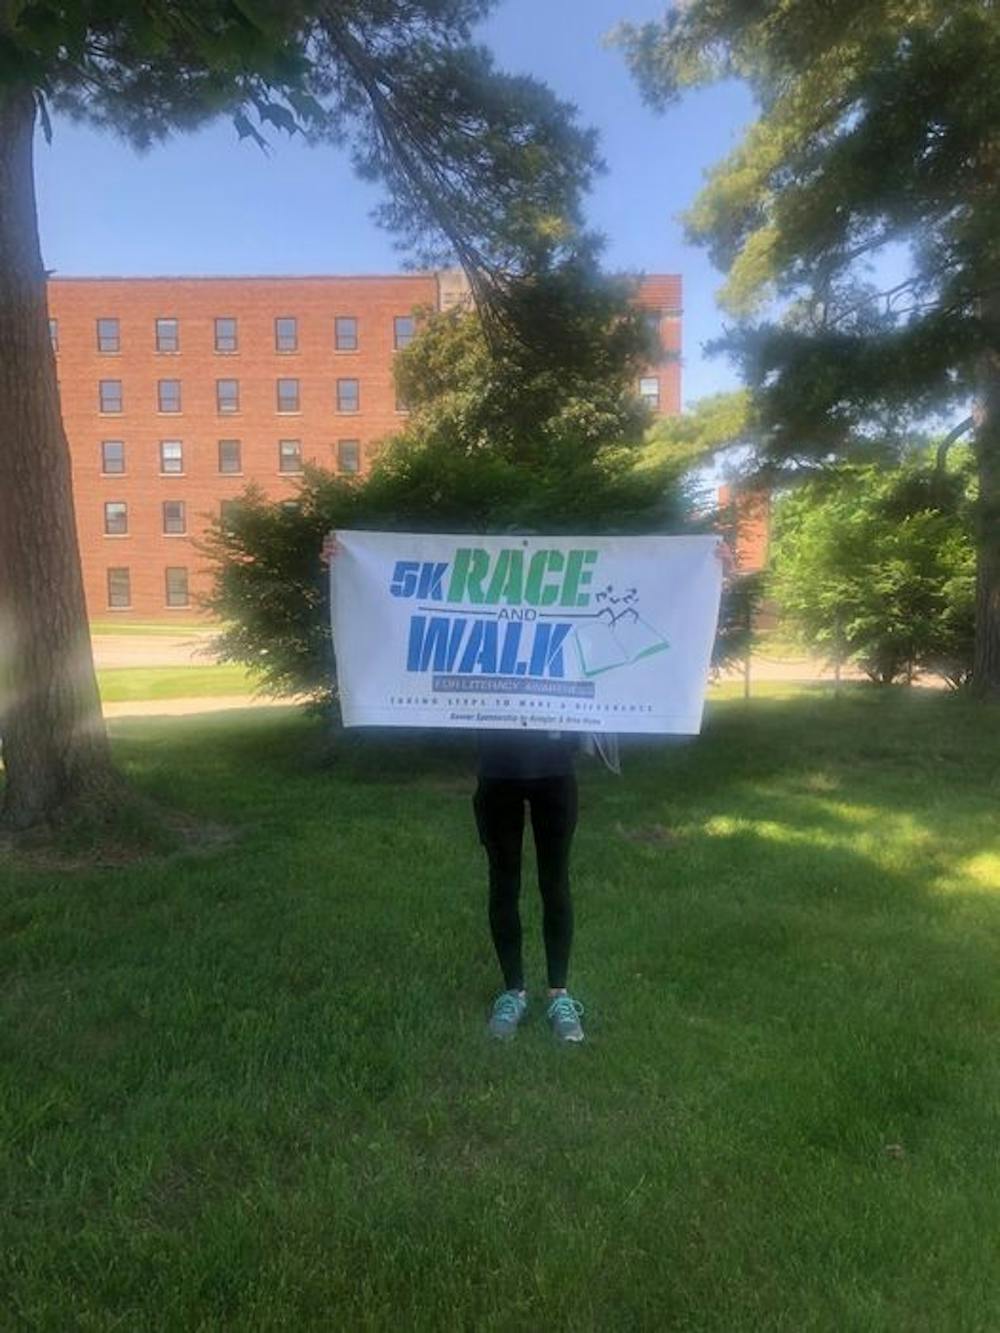 5K Race and Walk for Literacy Awareness will be held on EMU's campus